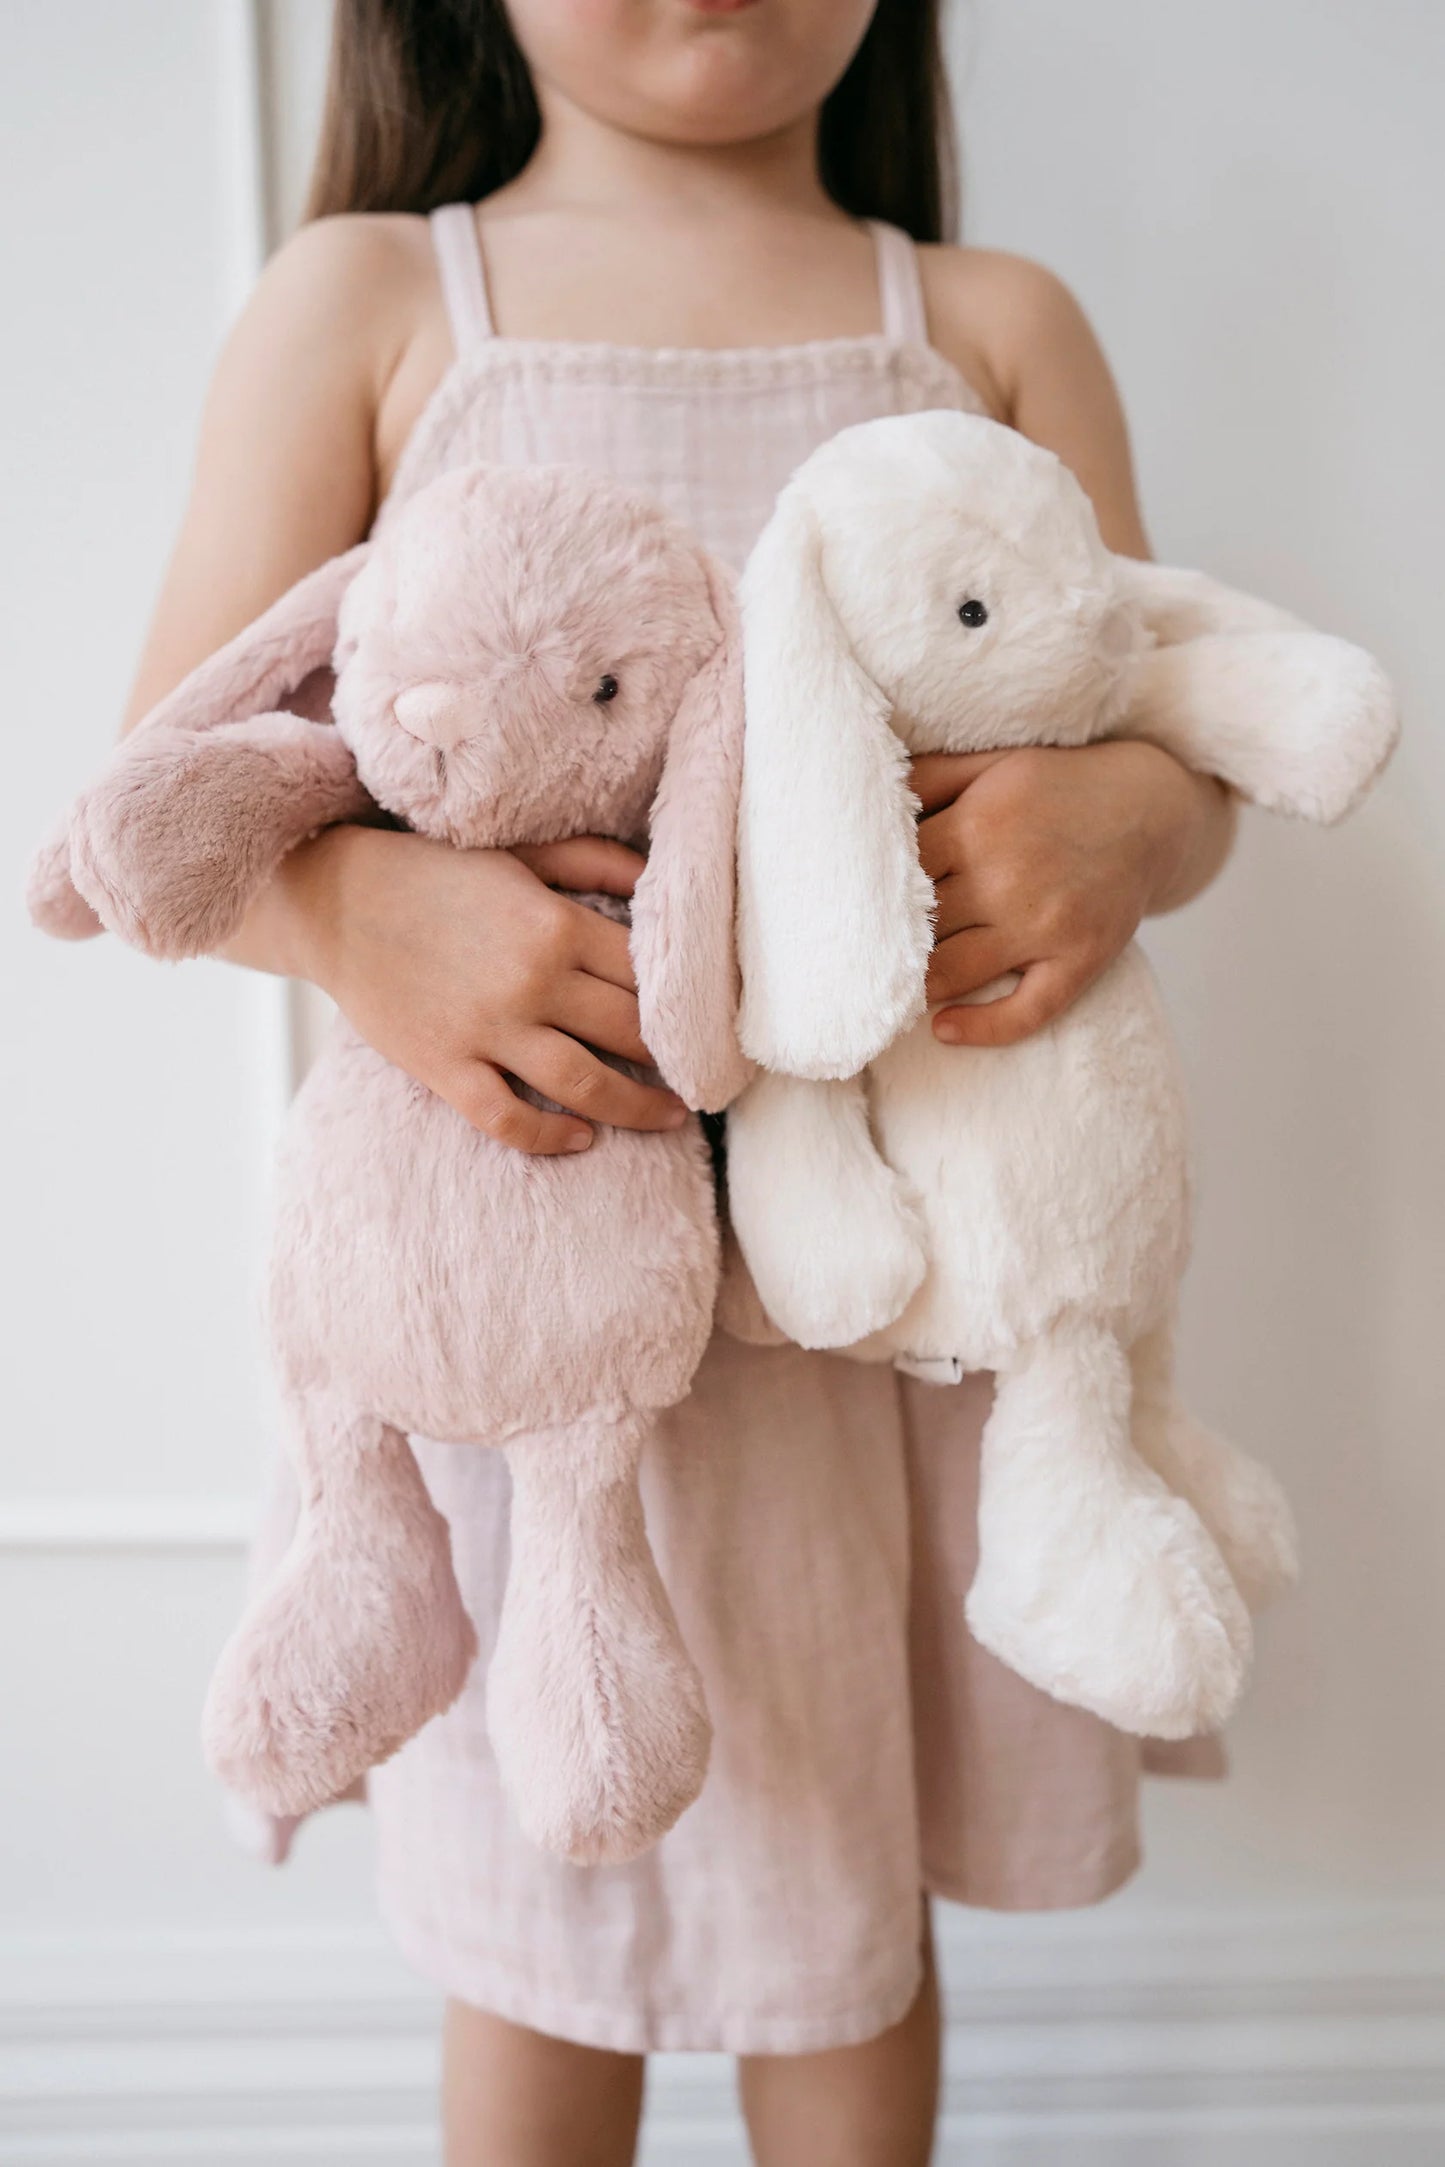 Jamie Kay Snuggle Bunnies  - Penelope the Bunny (Blush - Size Options Available)